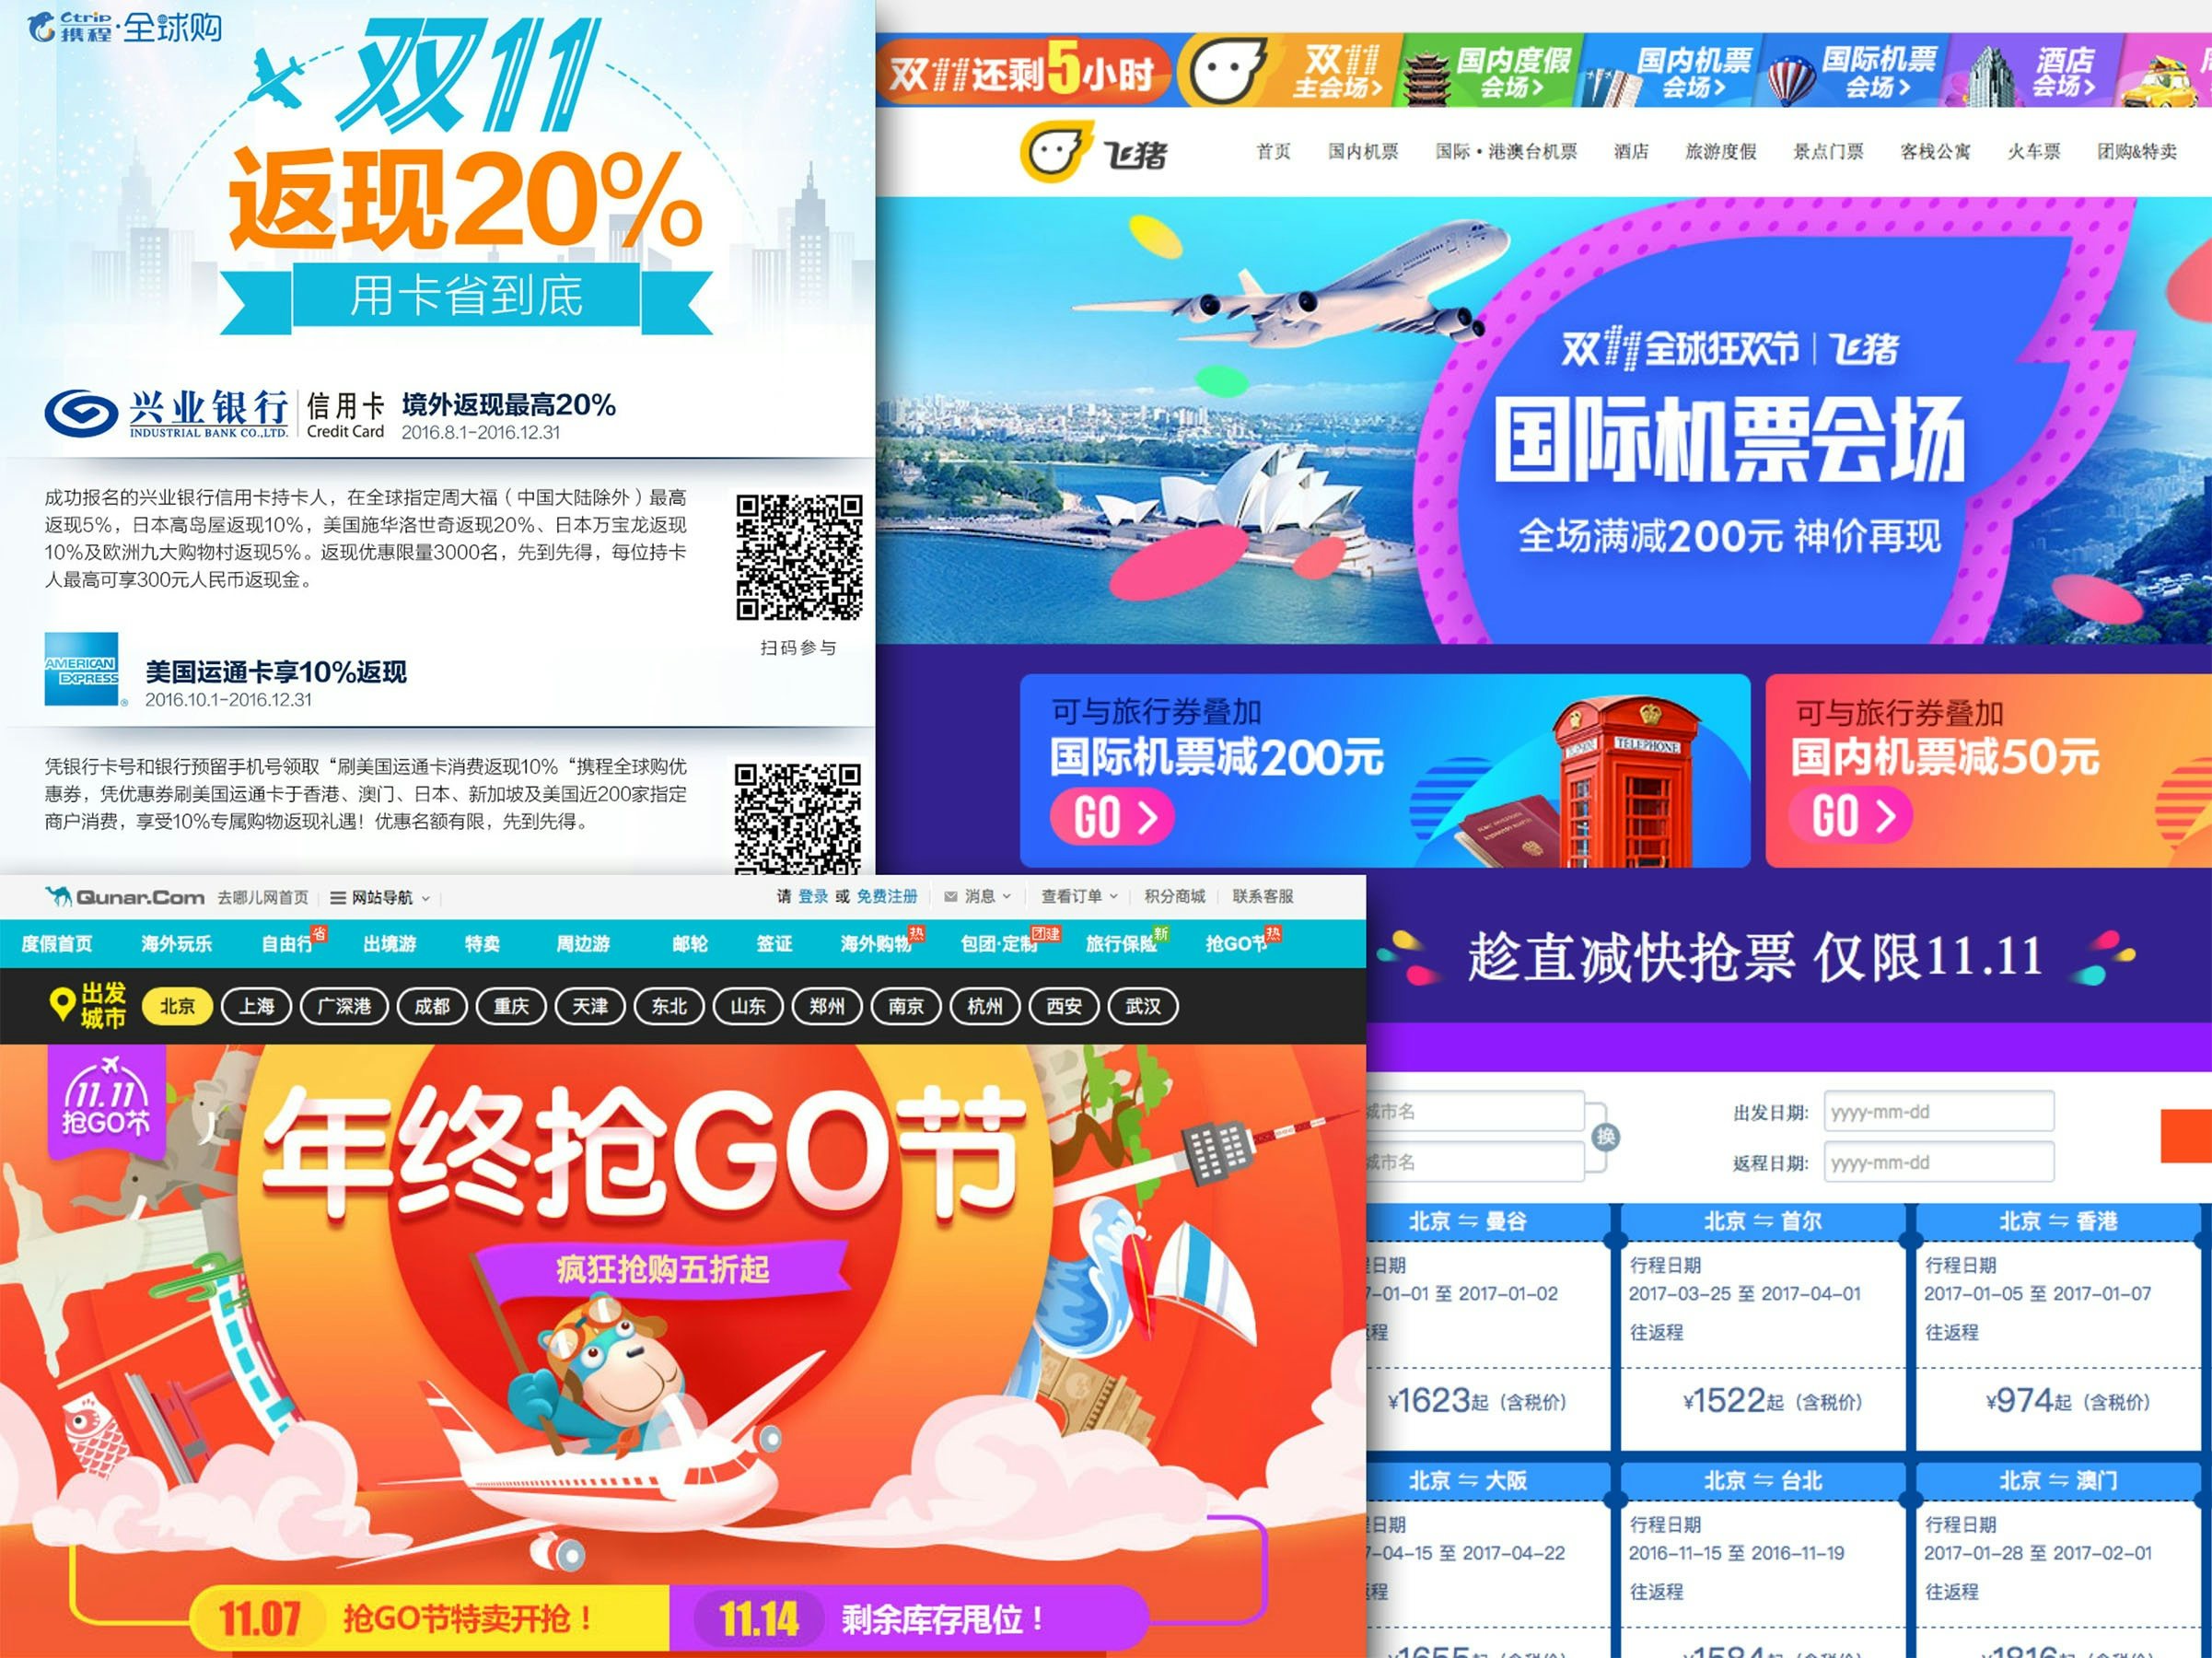 Alibaba's Fliggy wasn't the only player in travel to offer discounts and other special offers on Singles' Day.